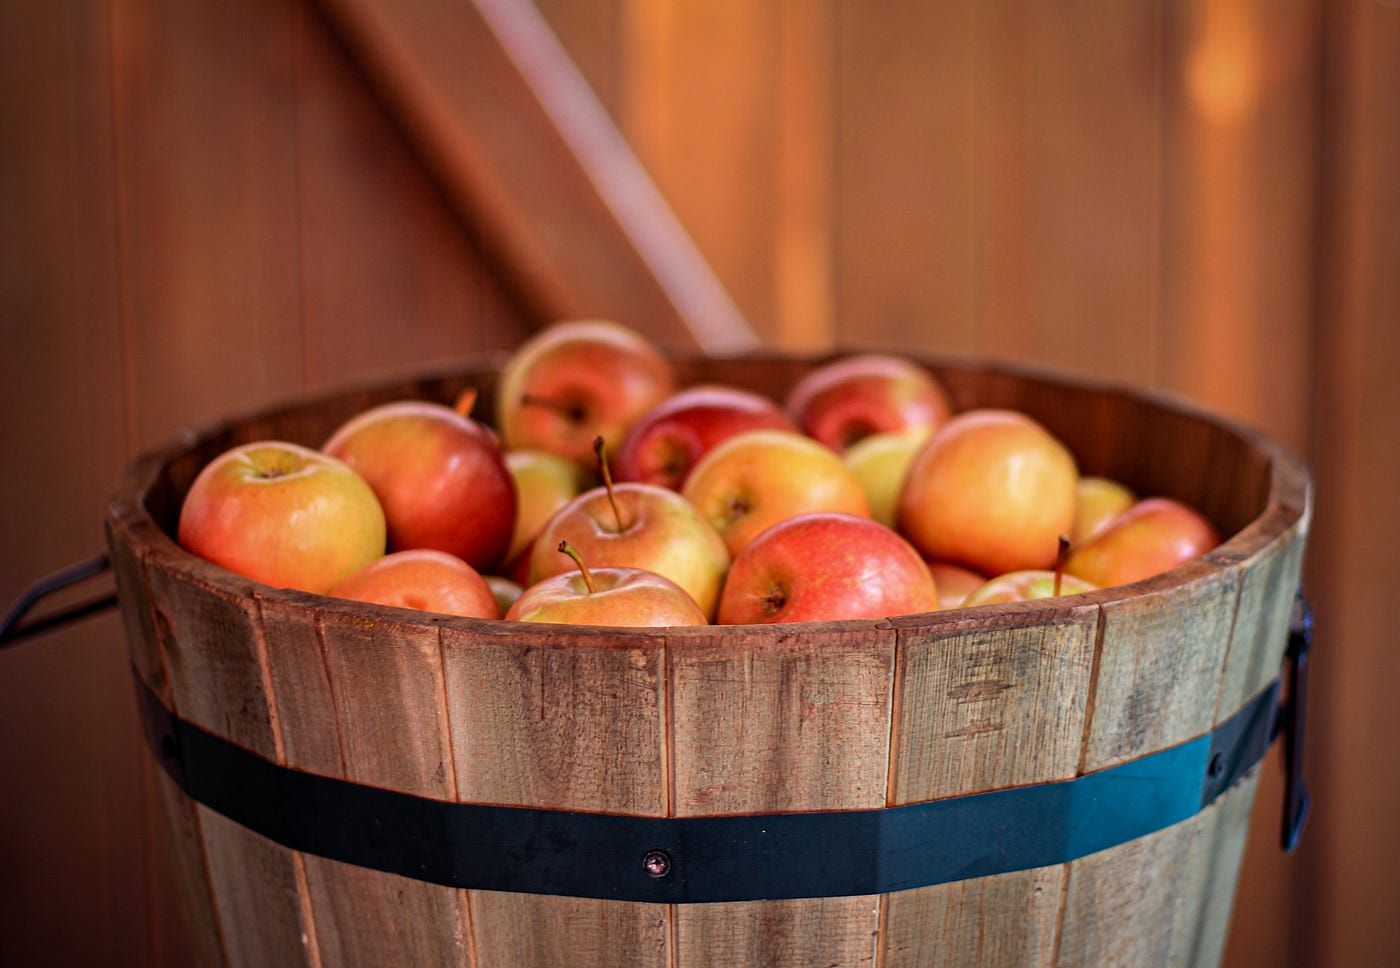 How To Store Apples In A Barrel